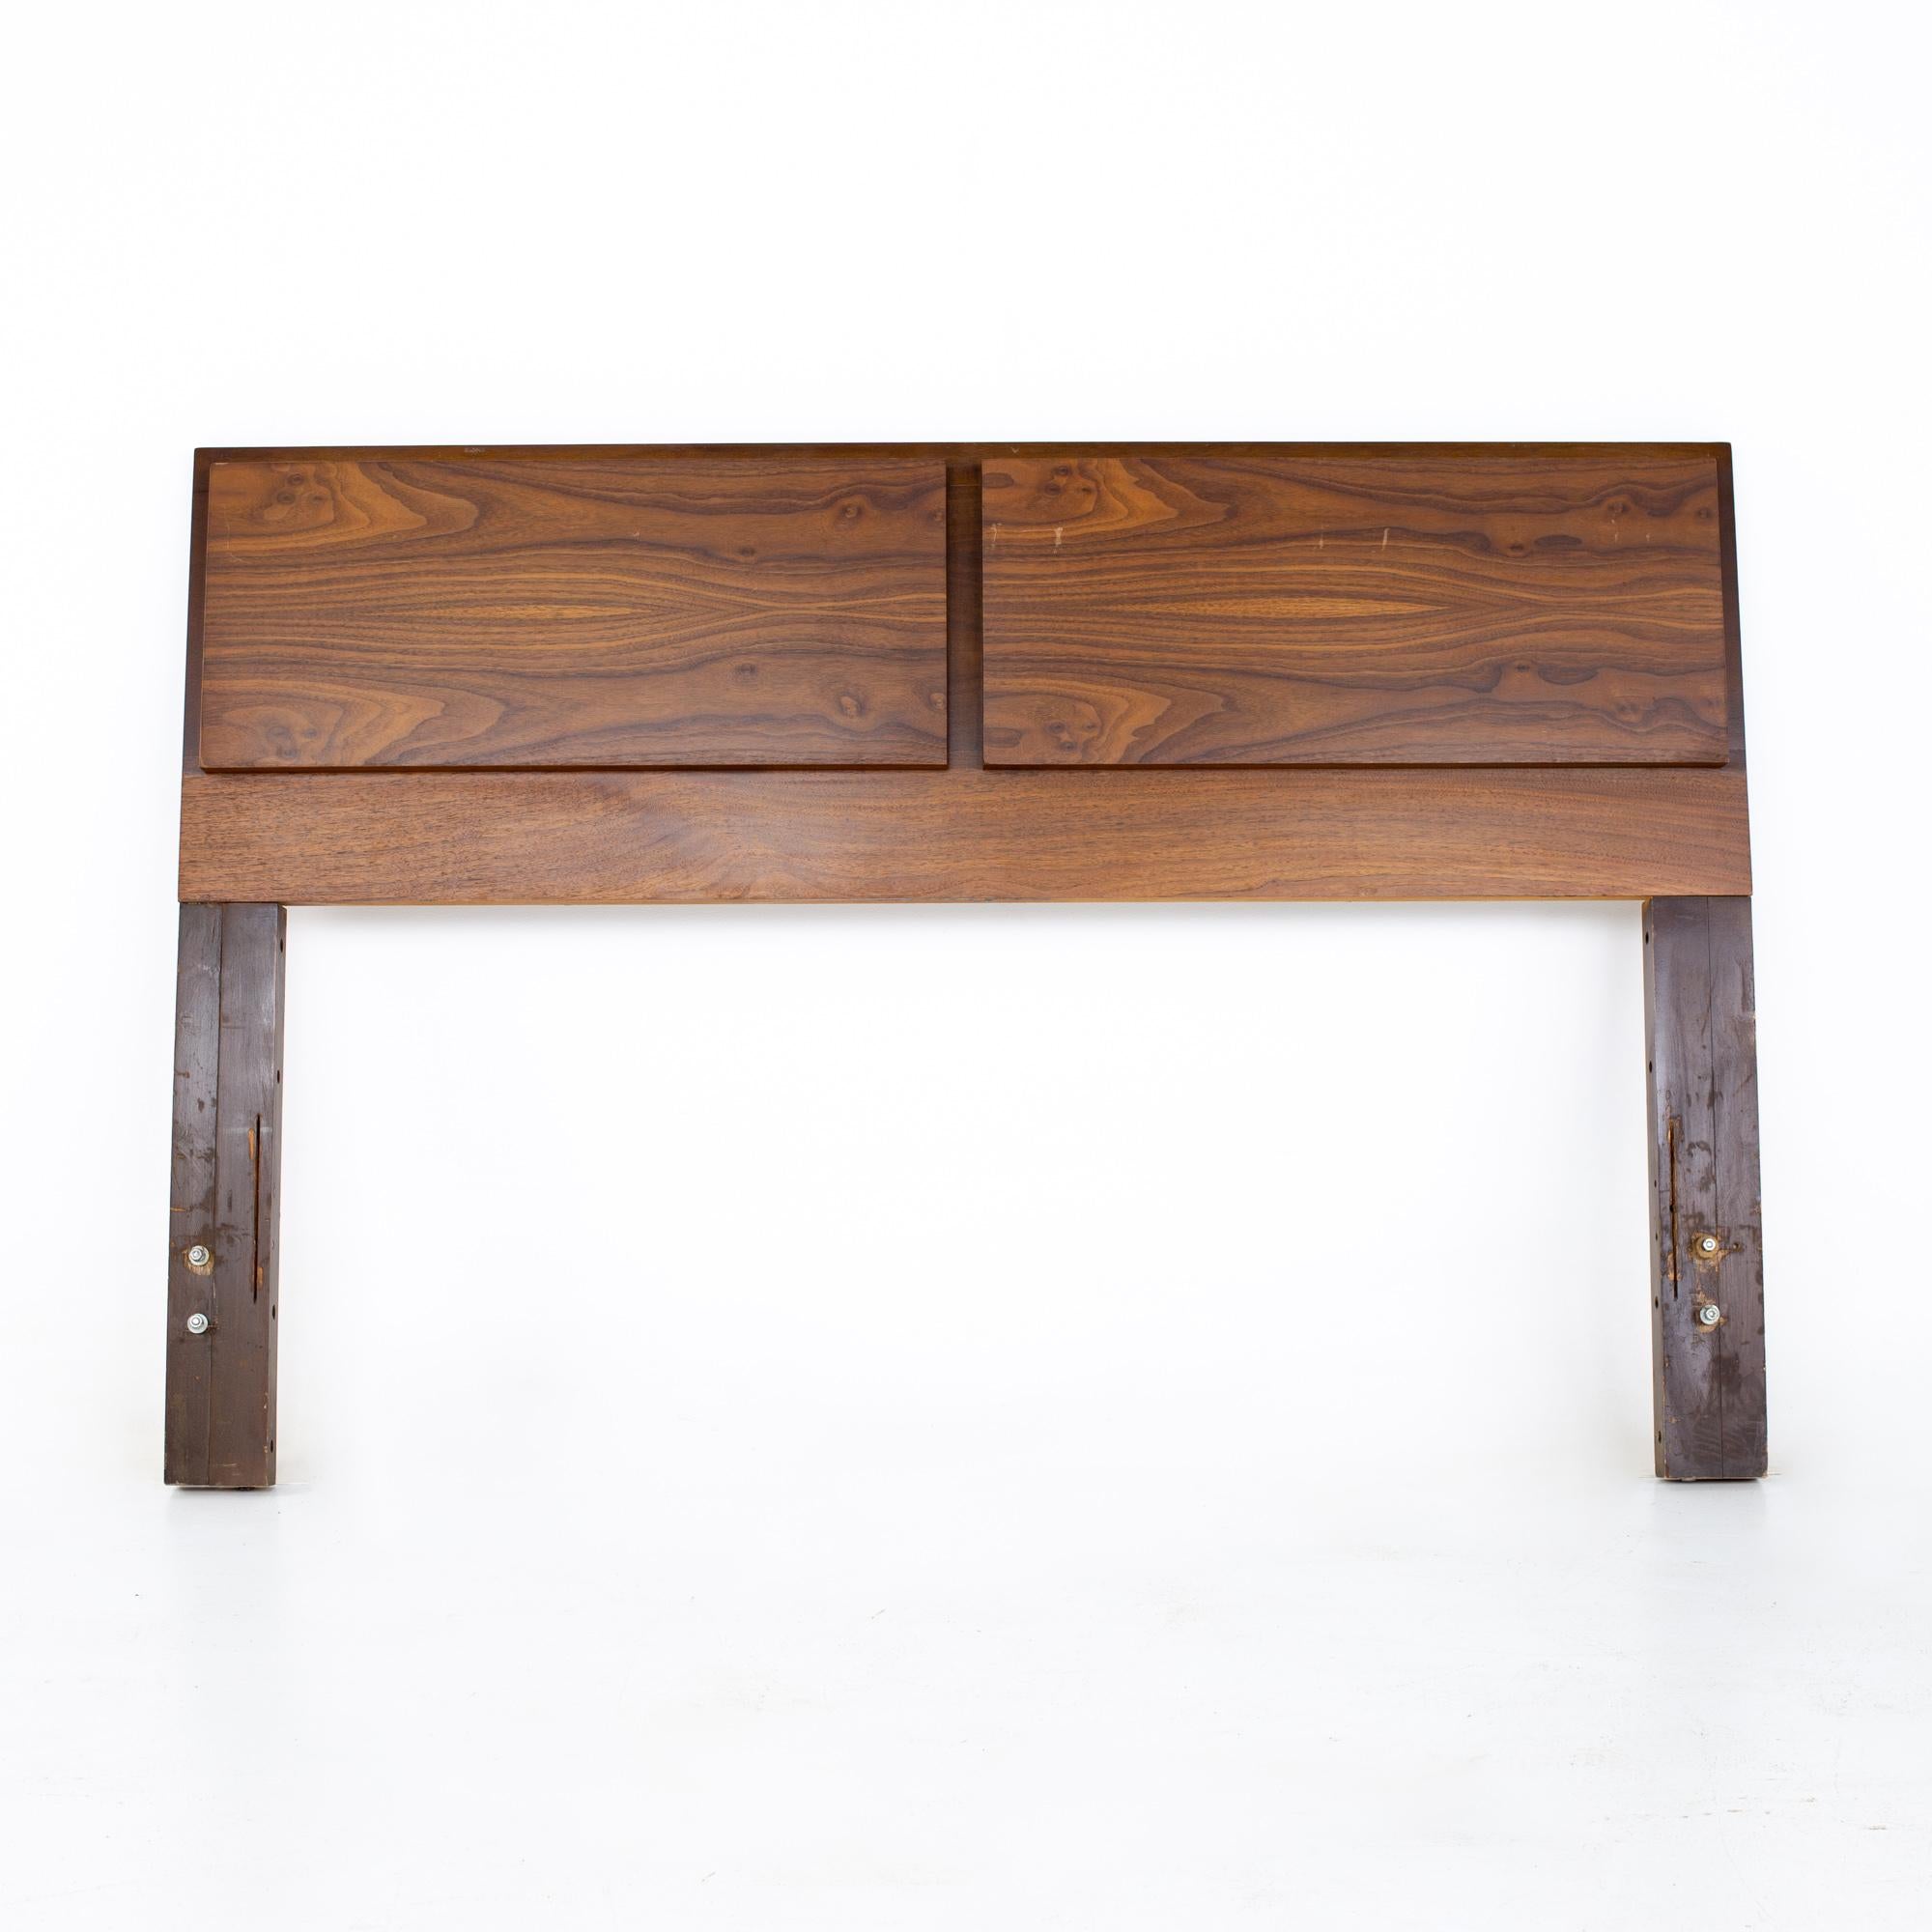 Lane Brutalist Style Mid Century walnut queen headboard

Headboard measures: 60.5 wide x 2.5 deep x 40.5 inches high

All pieces of furniture can be had in what we call restored vintage condition. That means the piece is restored upon purchase